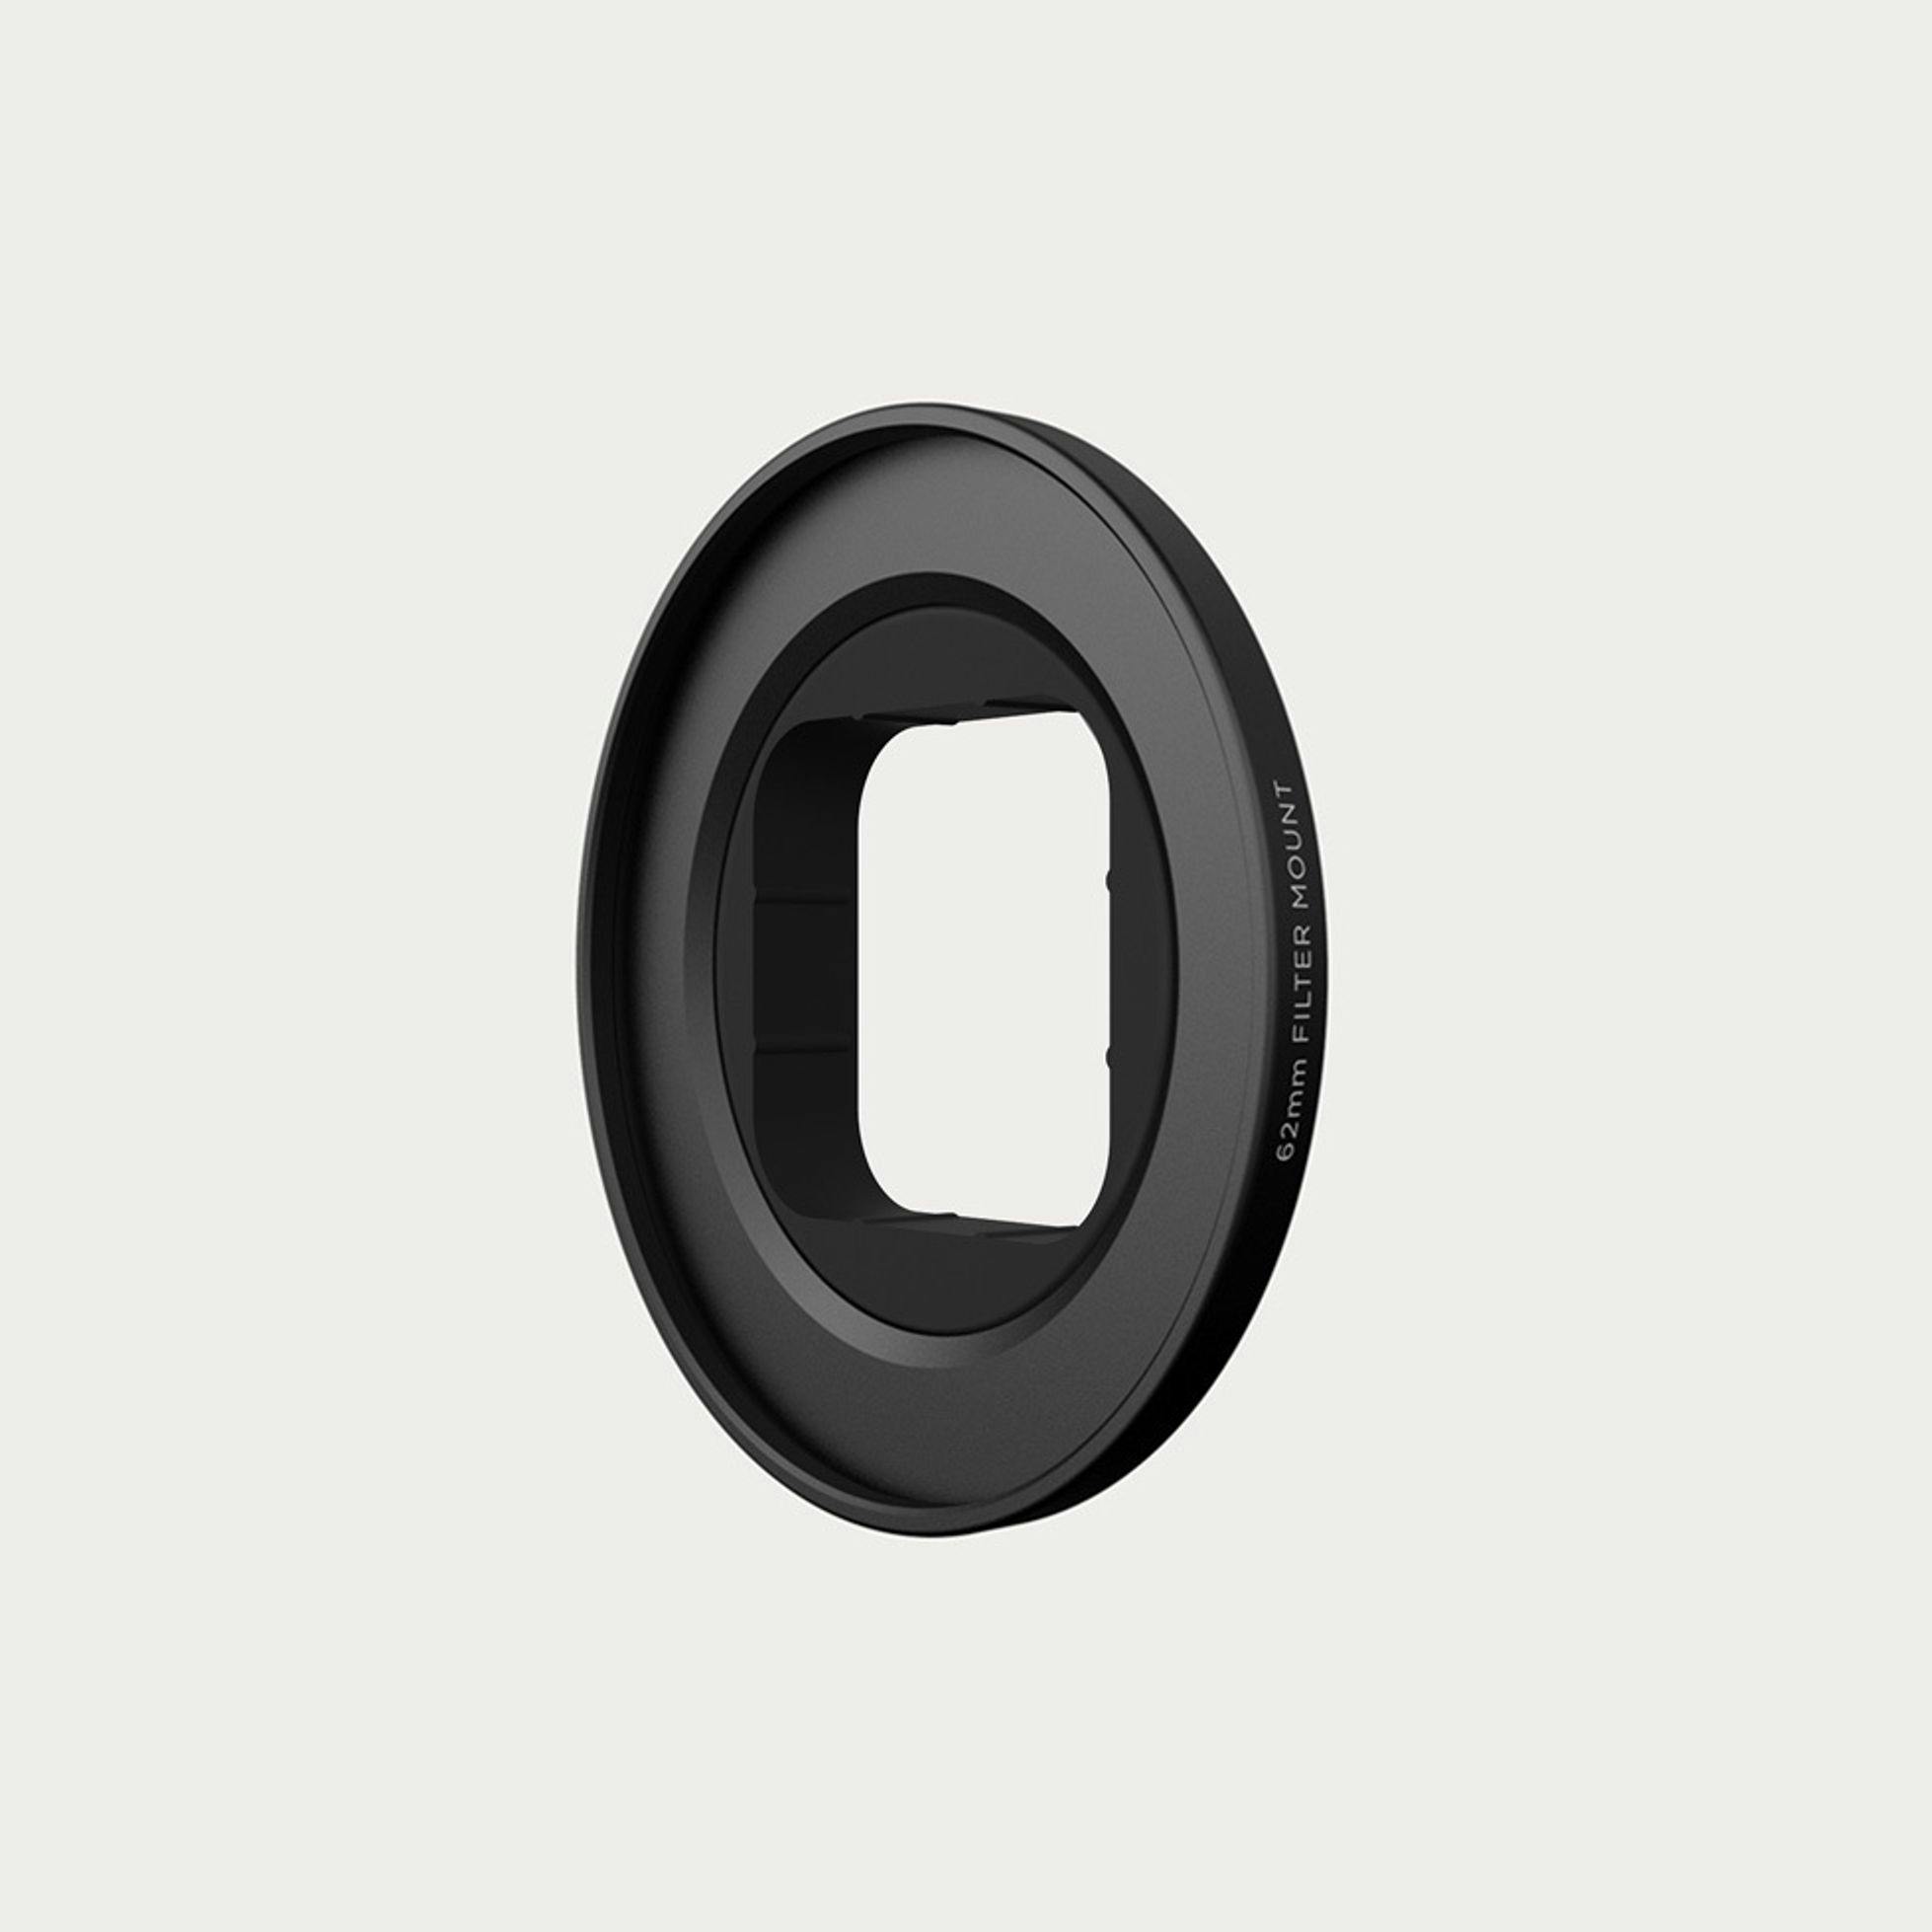 67mm Lens Filter Mount - All Series - M-Series / 67mm